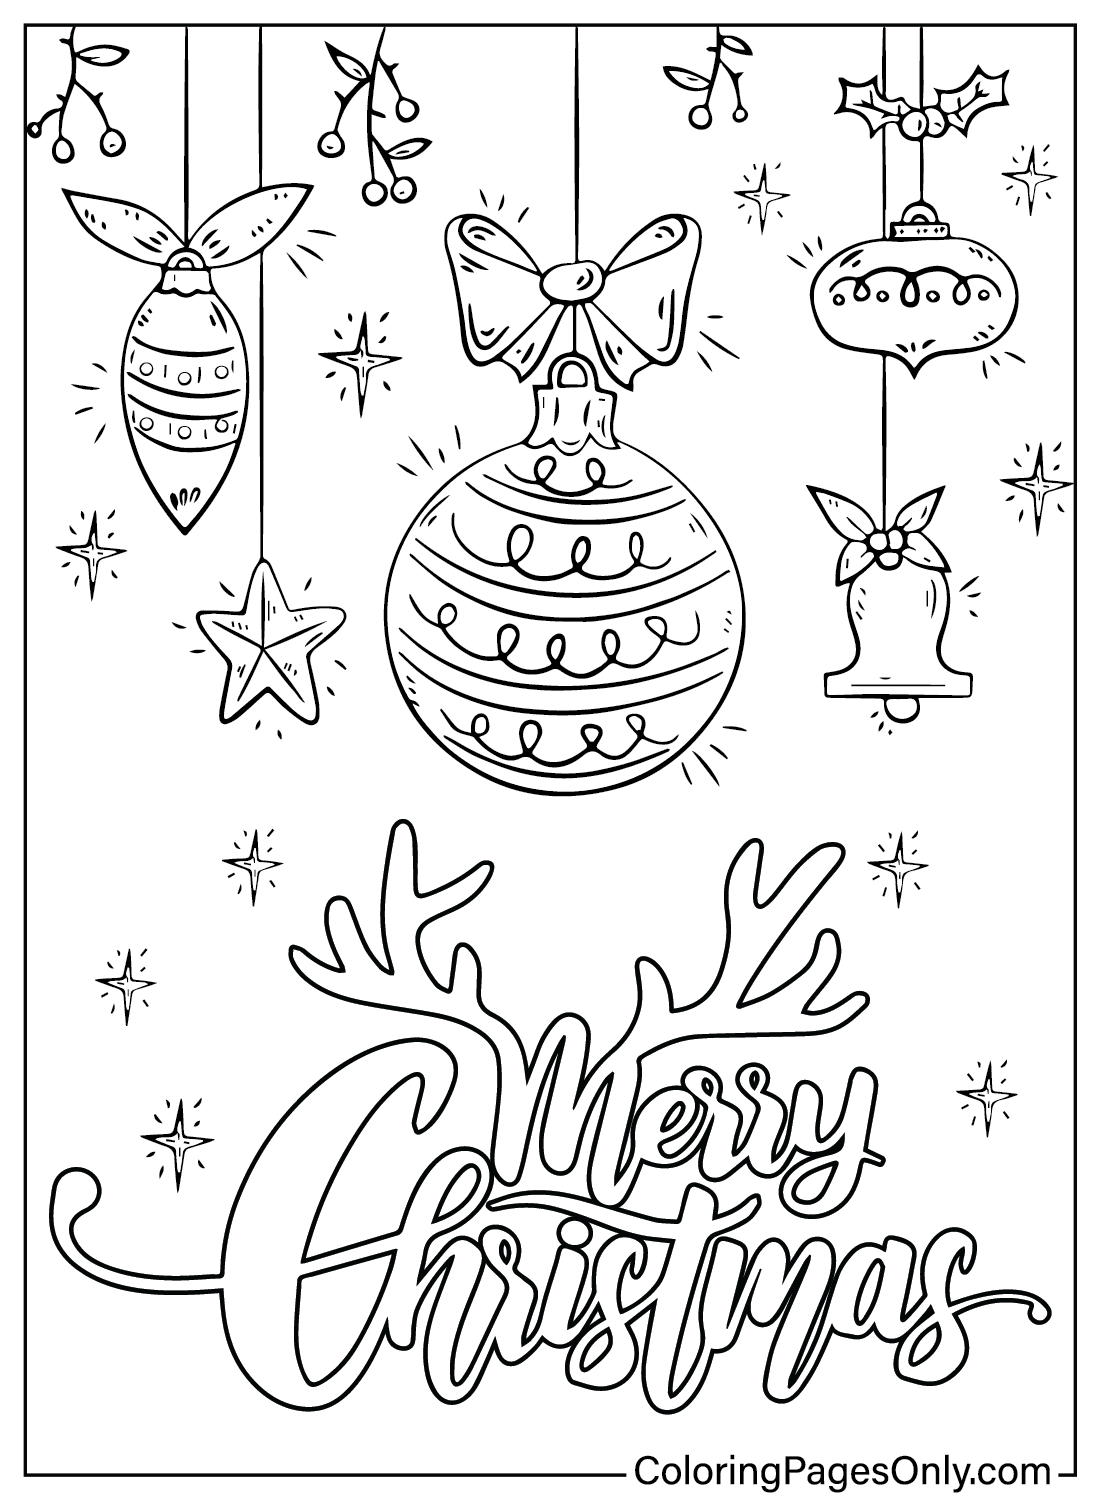 Free Christmas Ornaments Coloring Page